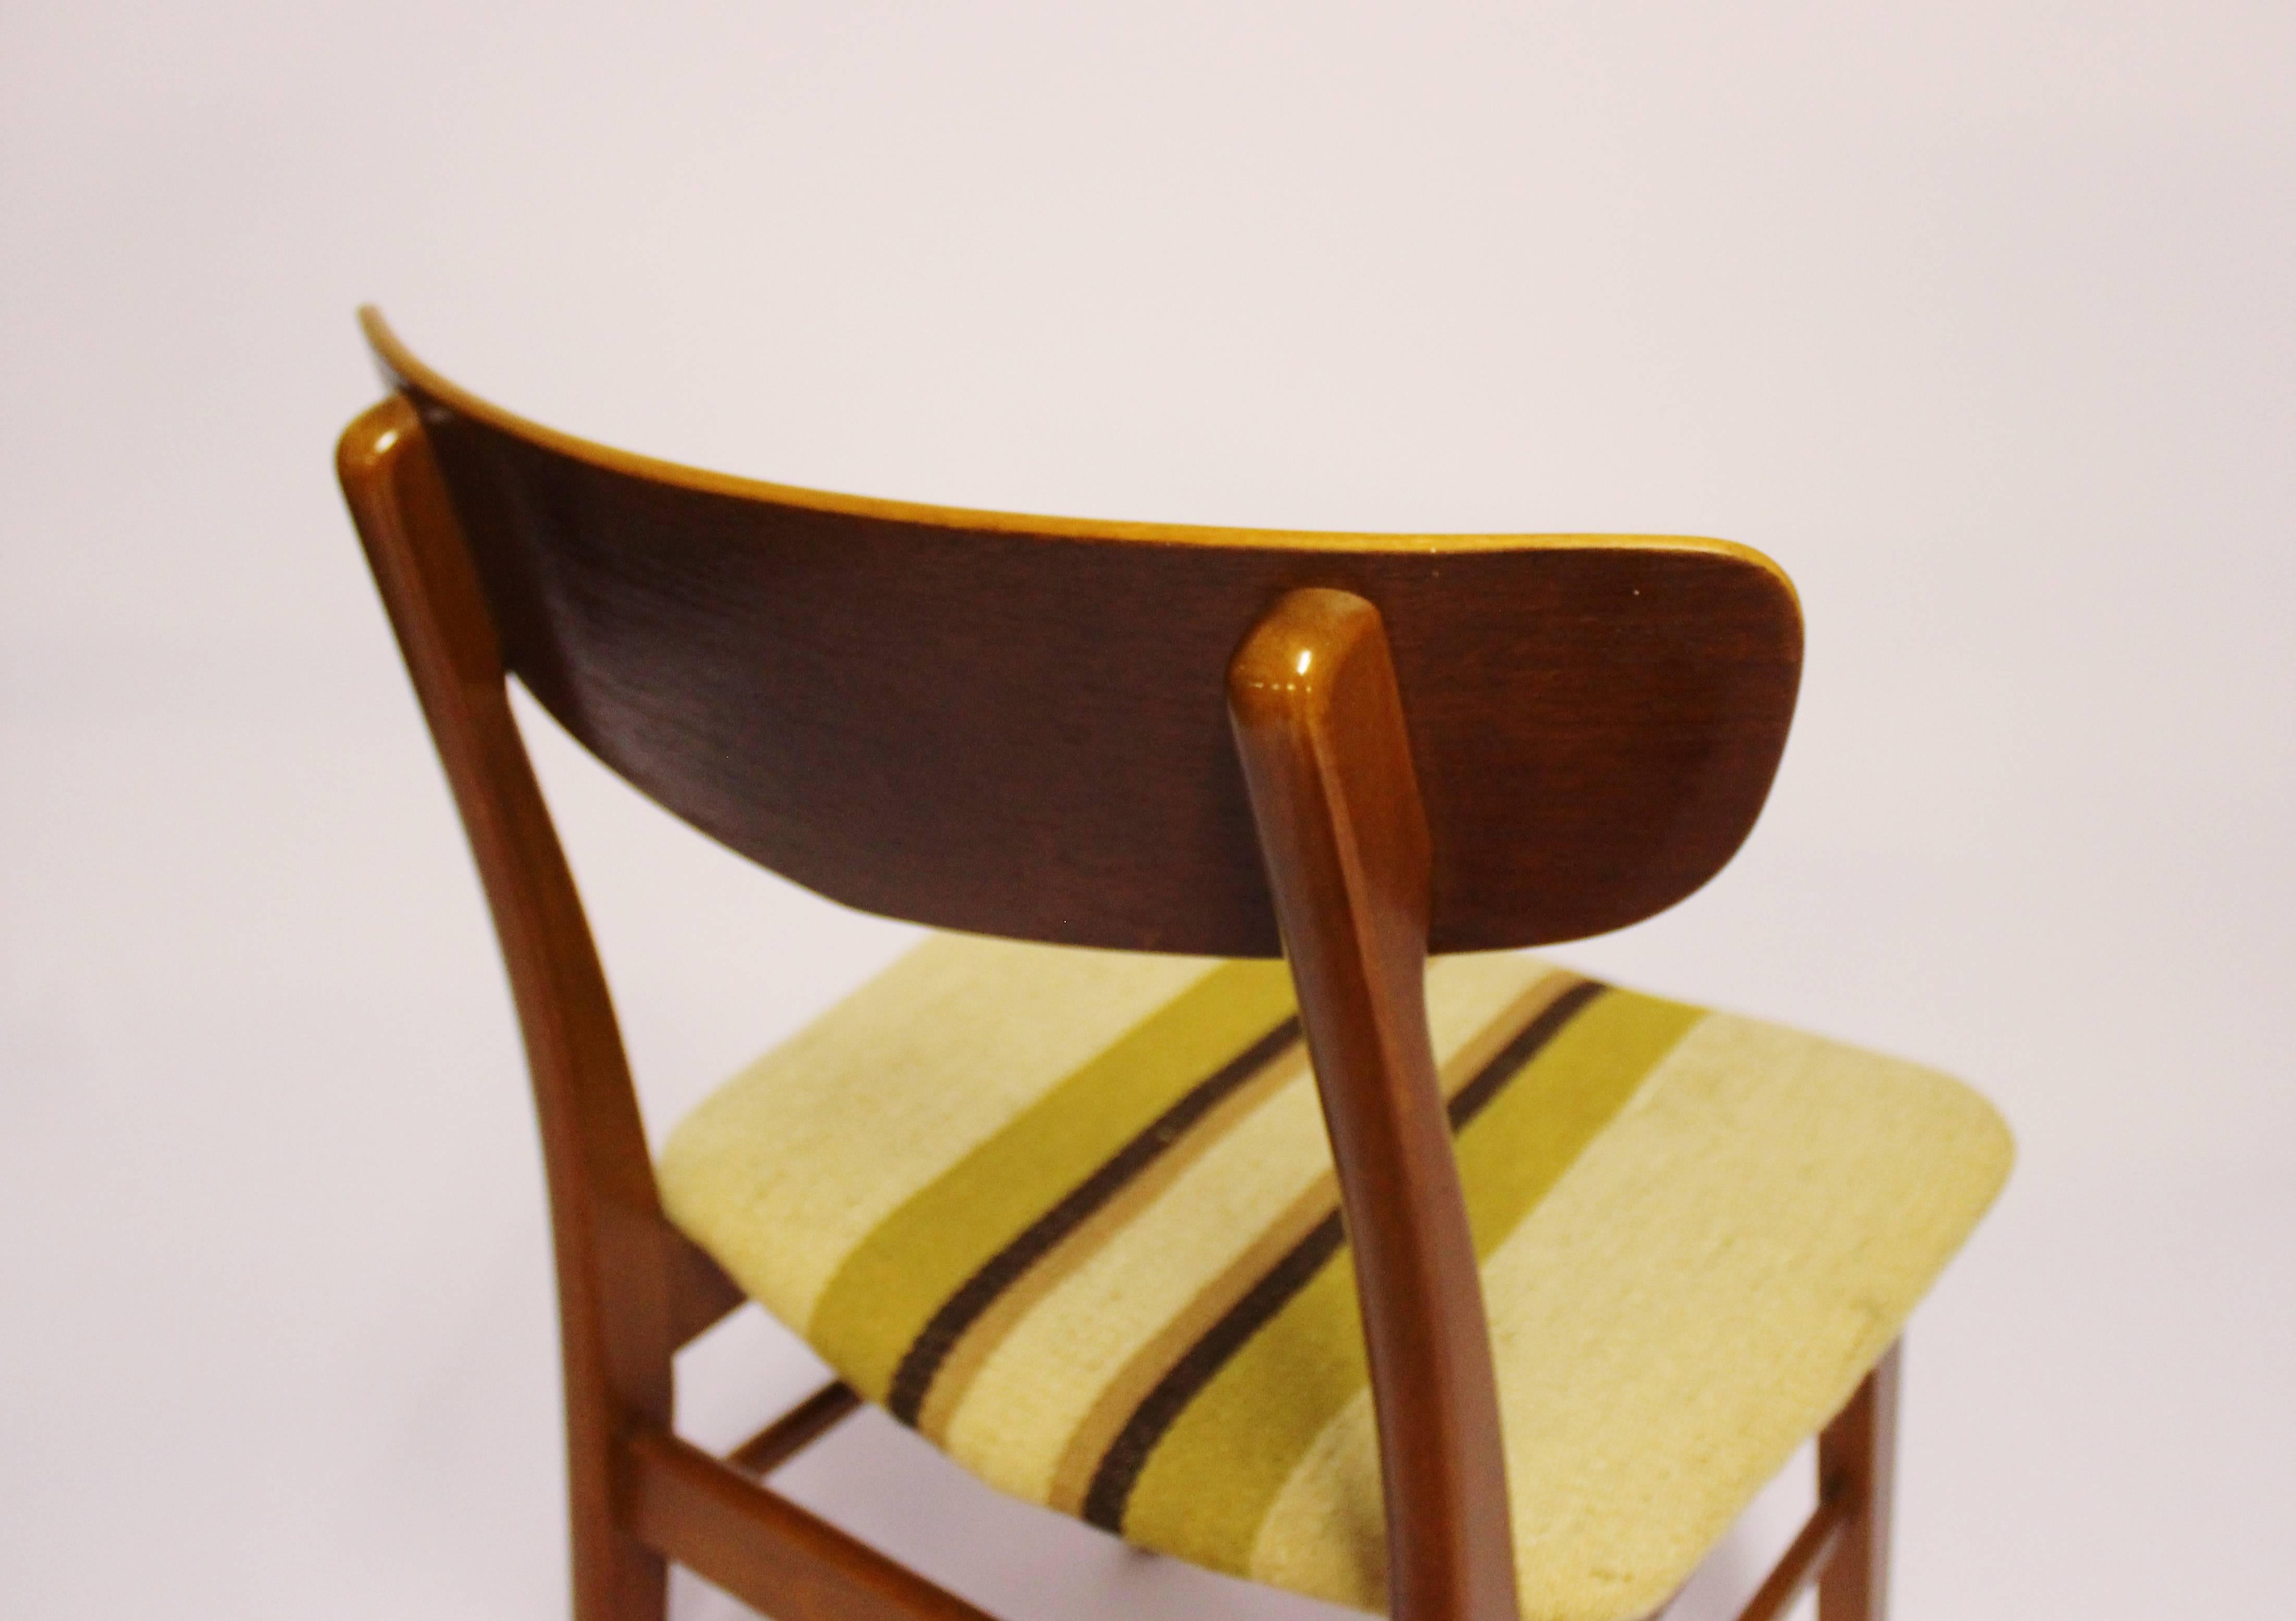 Wool Scandinavian Modern Set of Six Dining Chairs in Teak from the 1960s For Sale